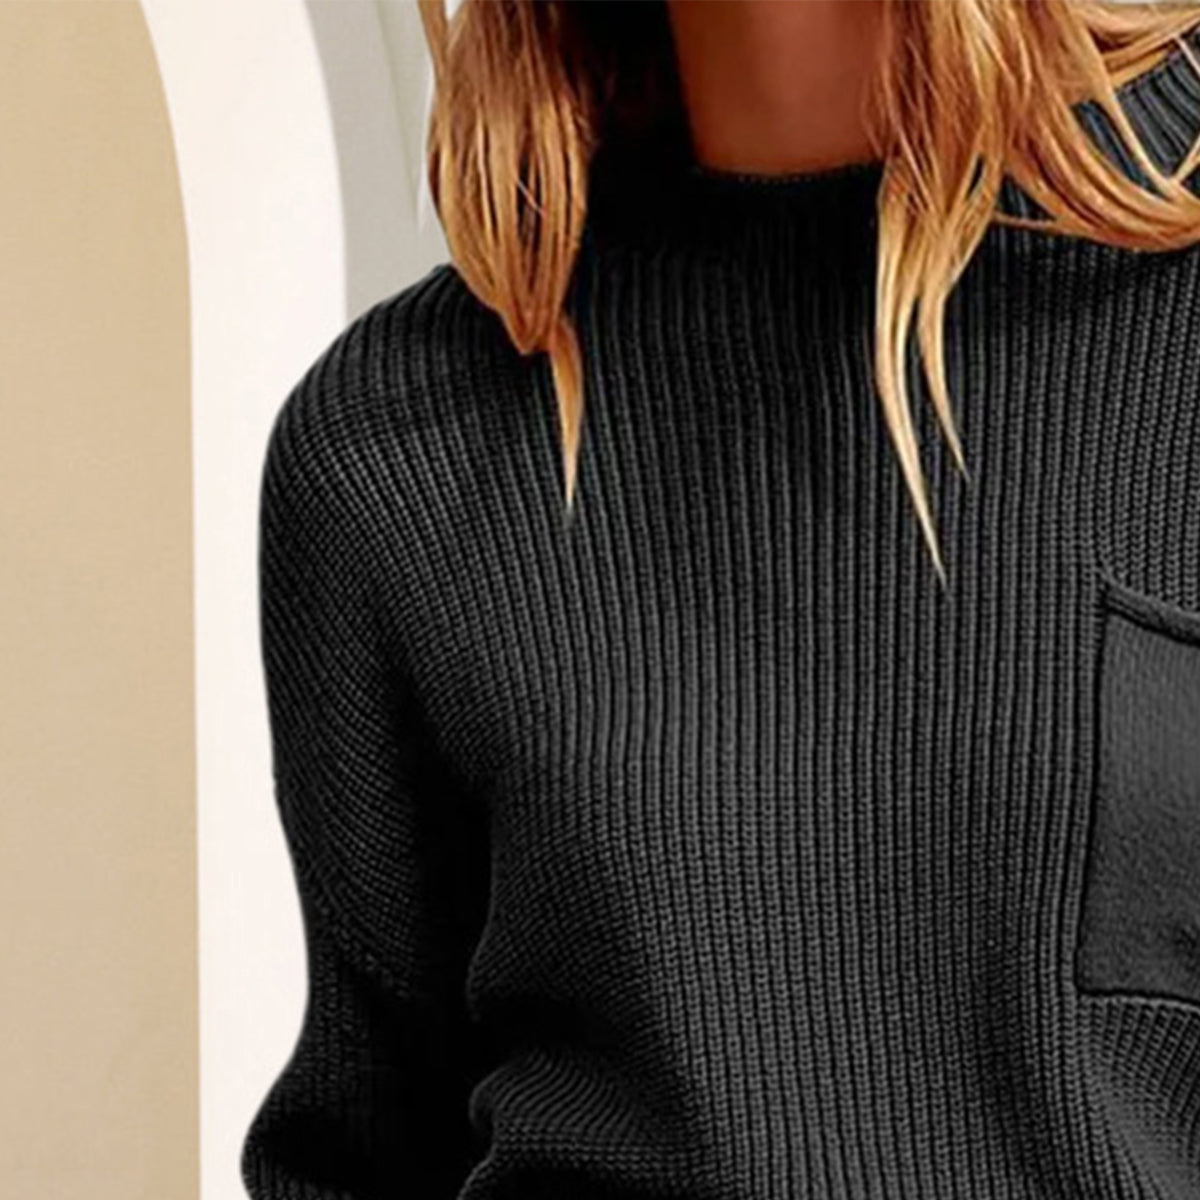 Rib-Knit Dropped Shoulder Sweater